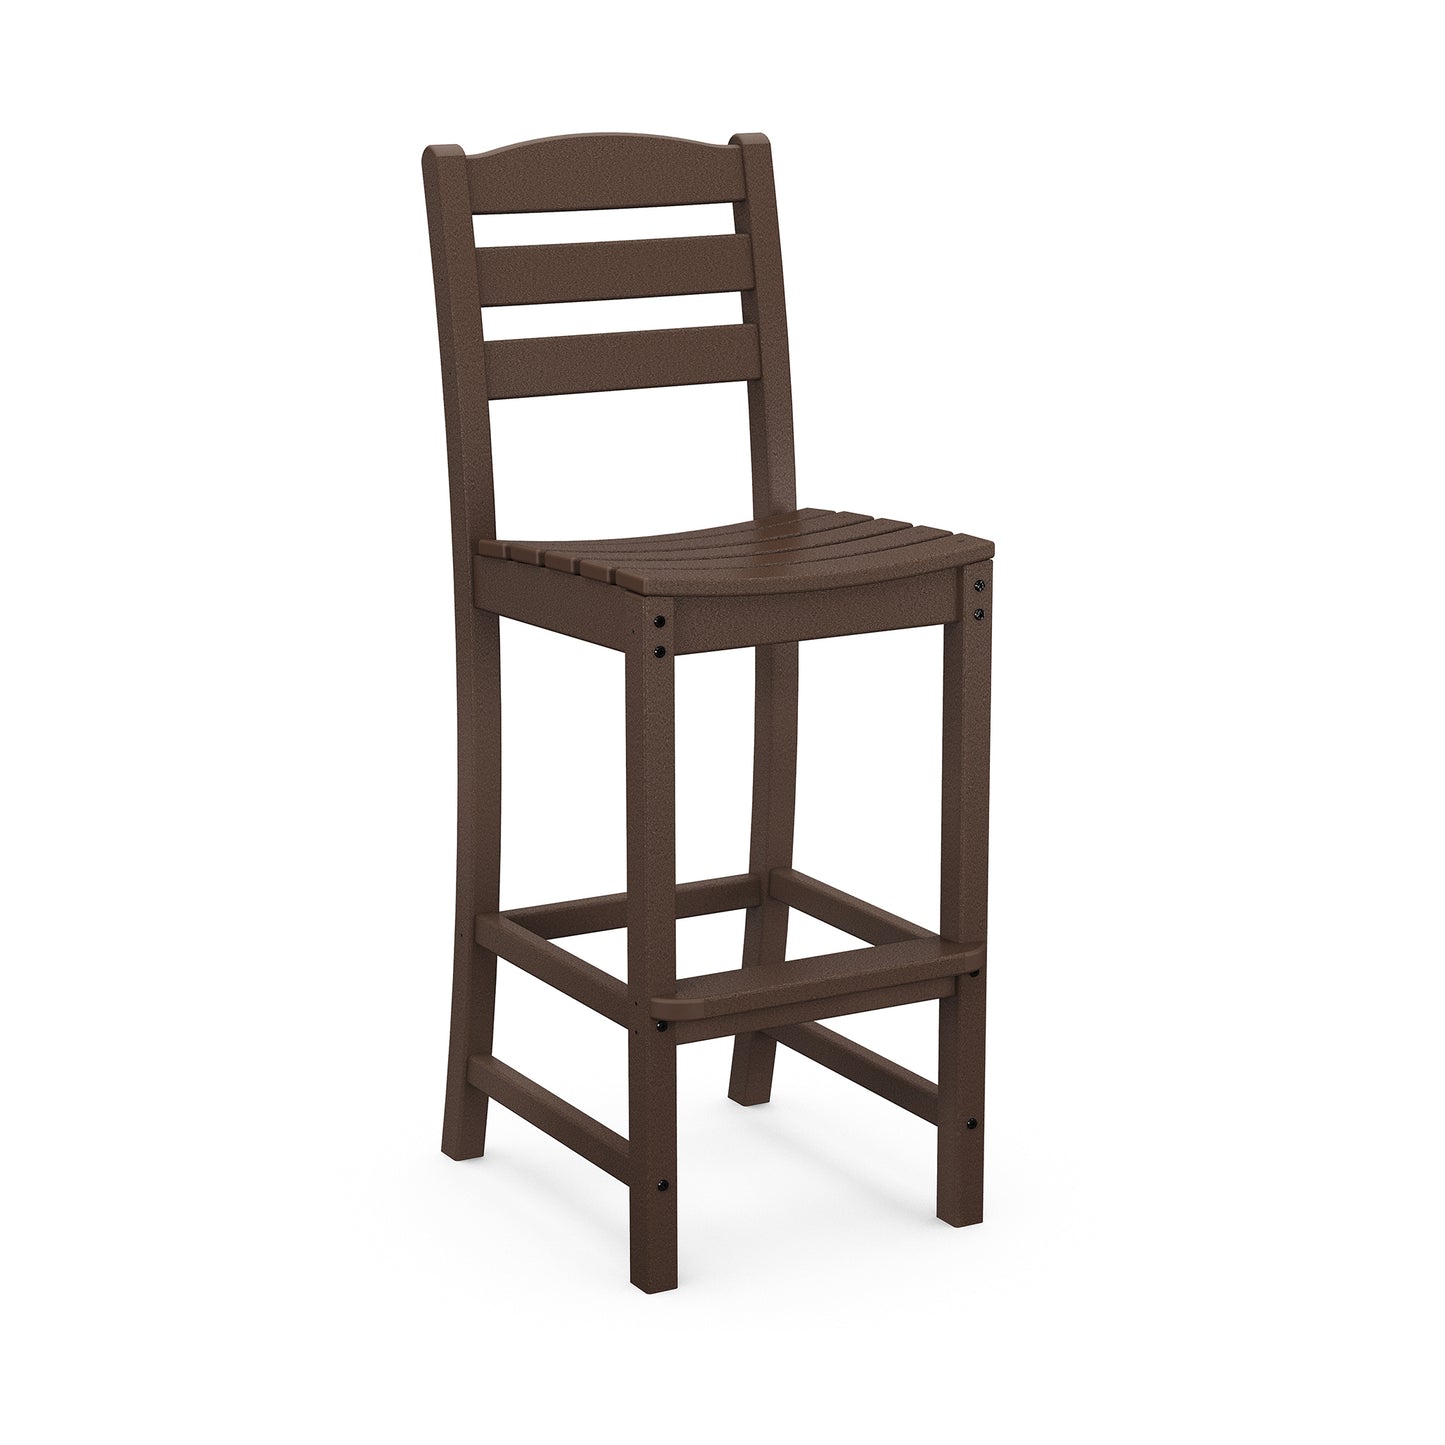 A brown POLYWOOD La Casa Cafe Outdoor Bar Side Chair with a slatted back and square seat, standing on four legs with footrests, isolated on a white background.